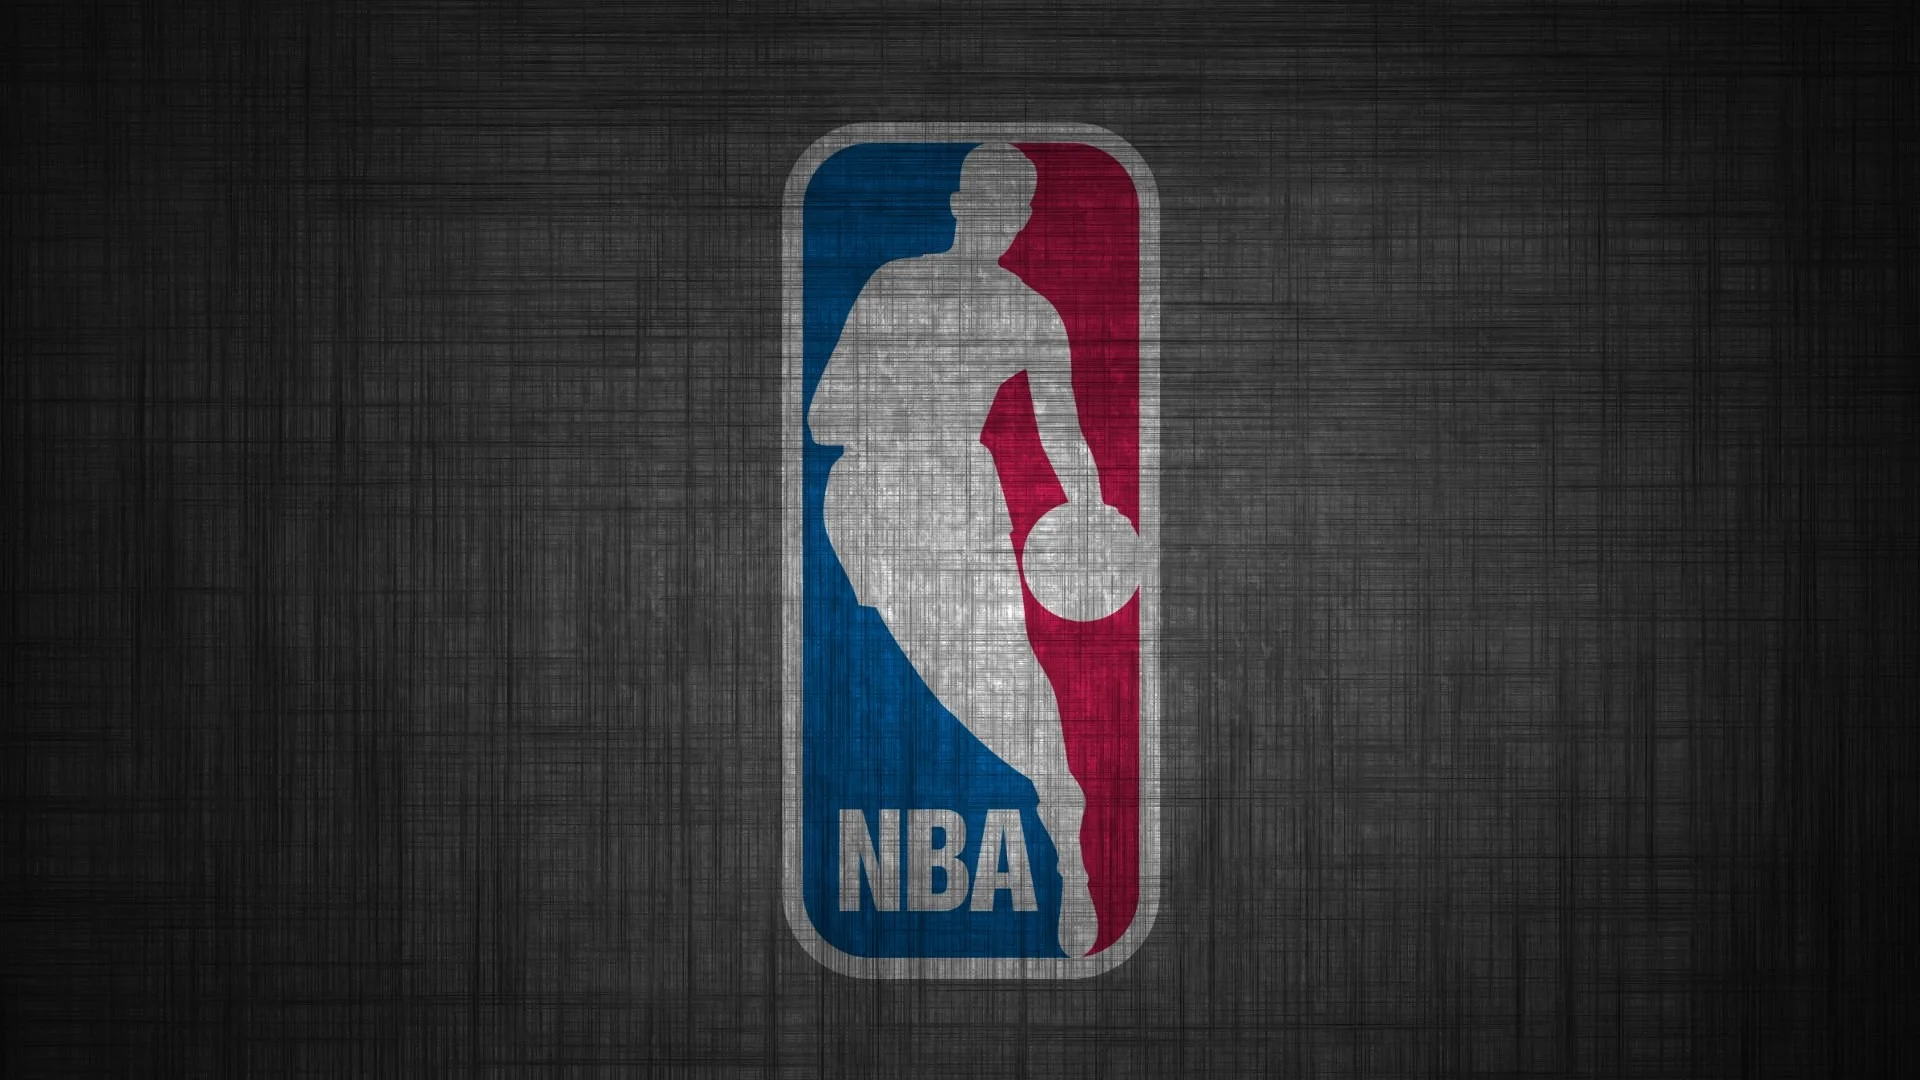 Nba Wallpapers HD, Desktop Backgrounds, Images and Pictures 1600Ã1000 Nba Wallpaper  Hd (49 Wallpapers) | Adorable Wallpapers | Desktop | Pinterest | Nba …